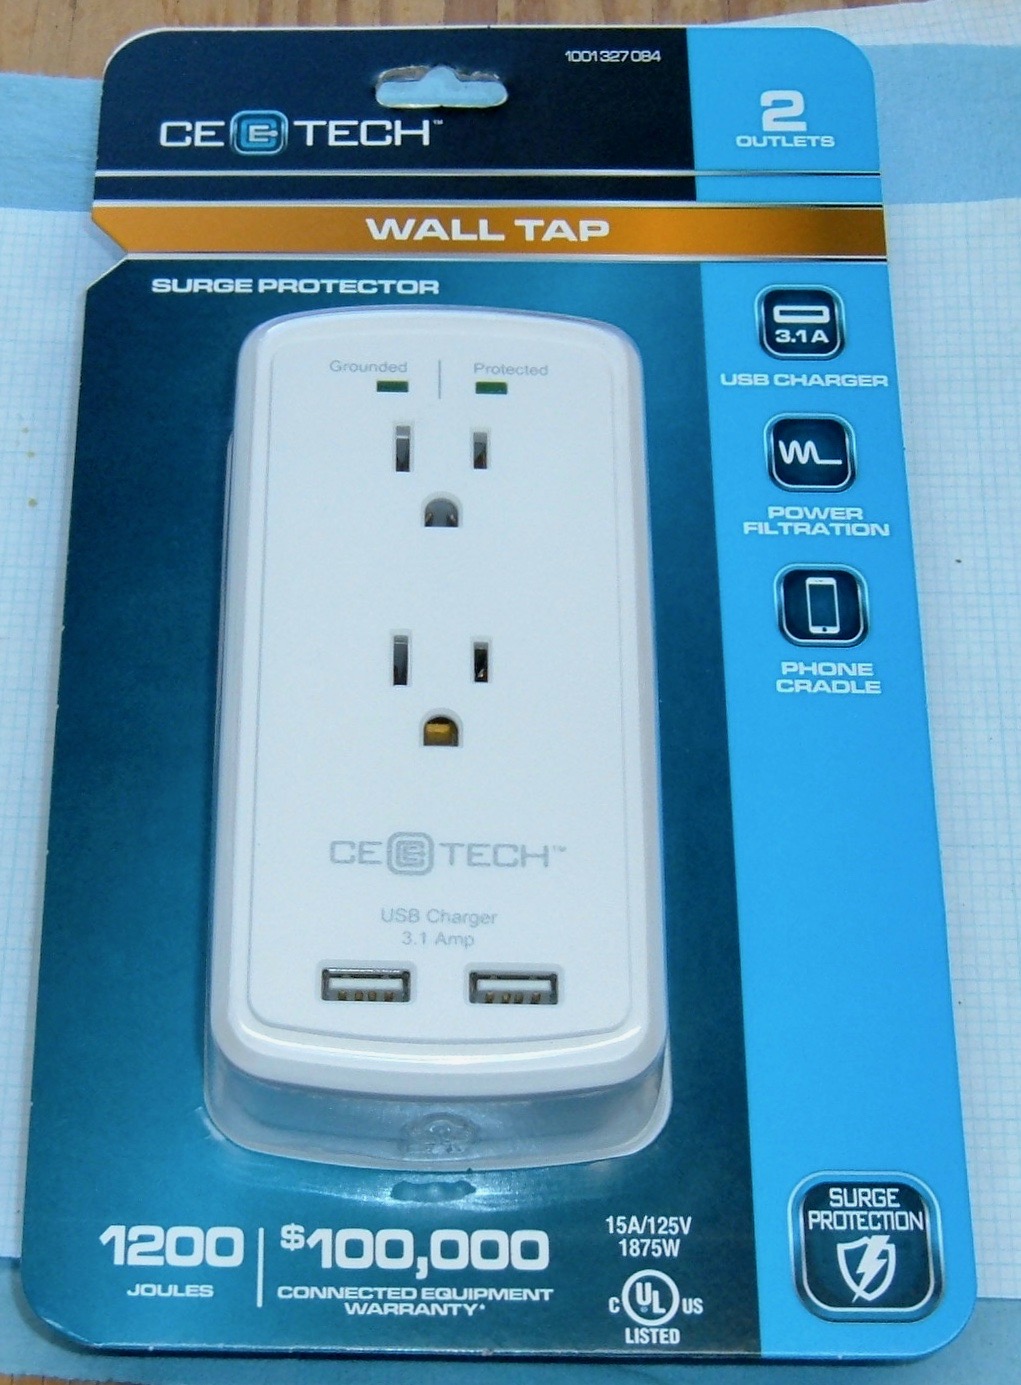 The Best USB Power Supply I've Found Yet: A Home Depot Surge Protector!